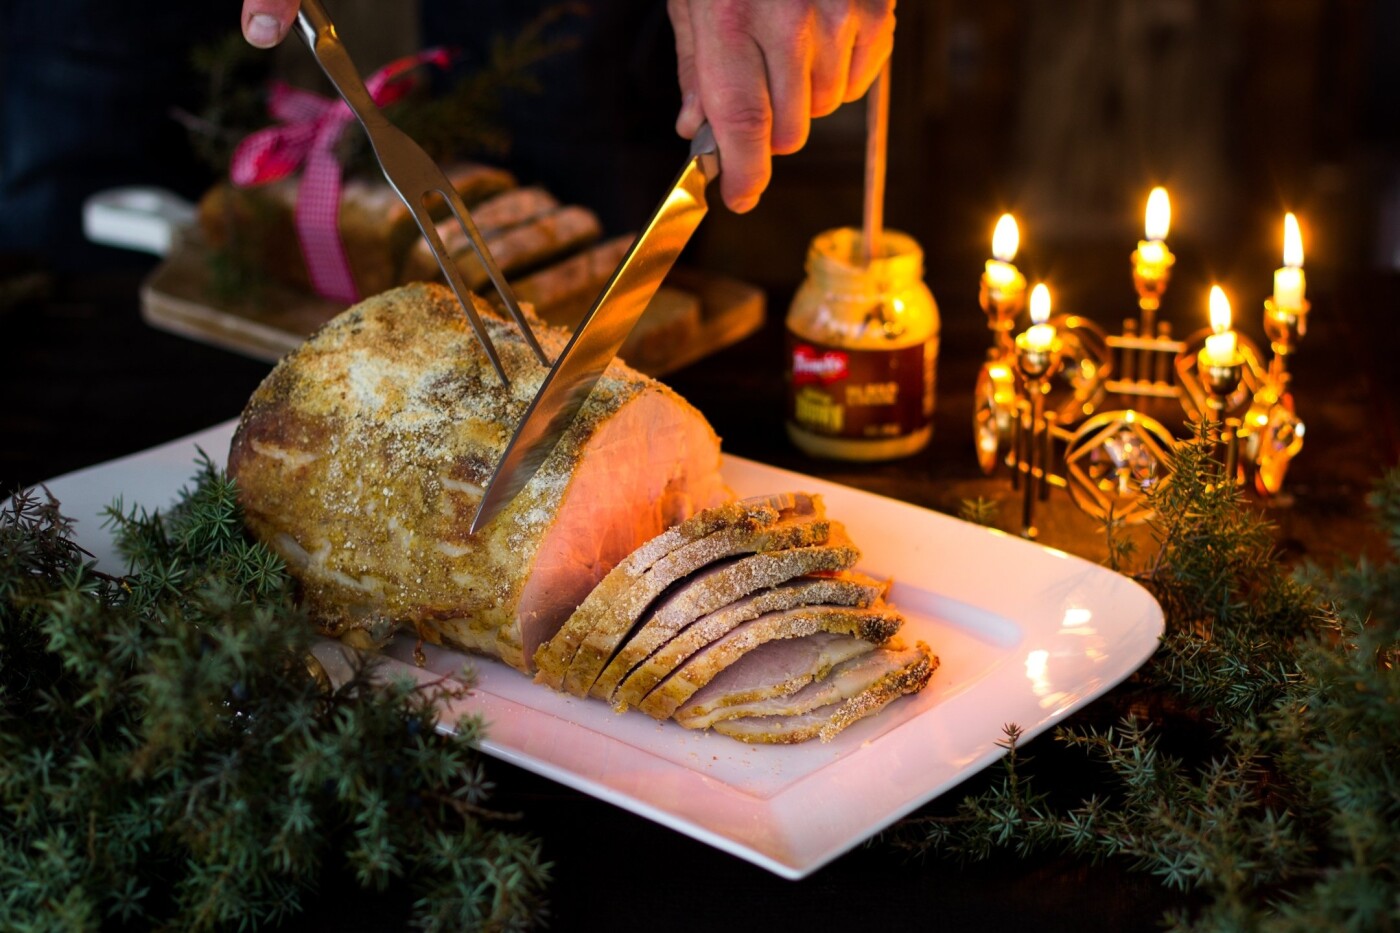 This moody picture is taken on a dark december winter day in Finland, when natural light is cold and harsh blue.<br />
Christmas was just around the corner and we made this traditional garnished Finnish christmas ham.